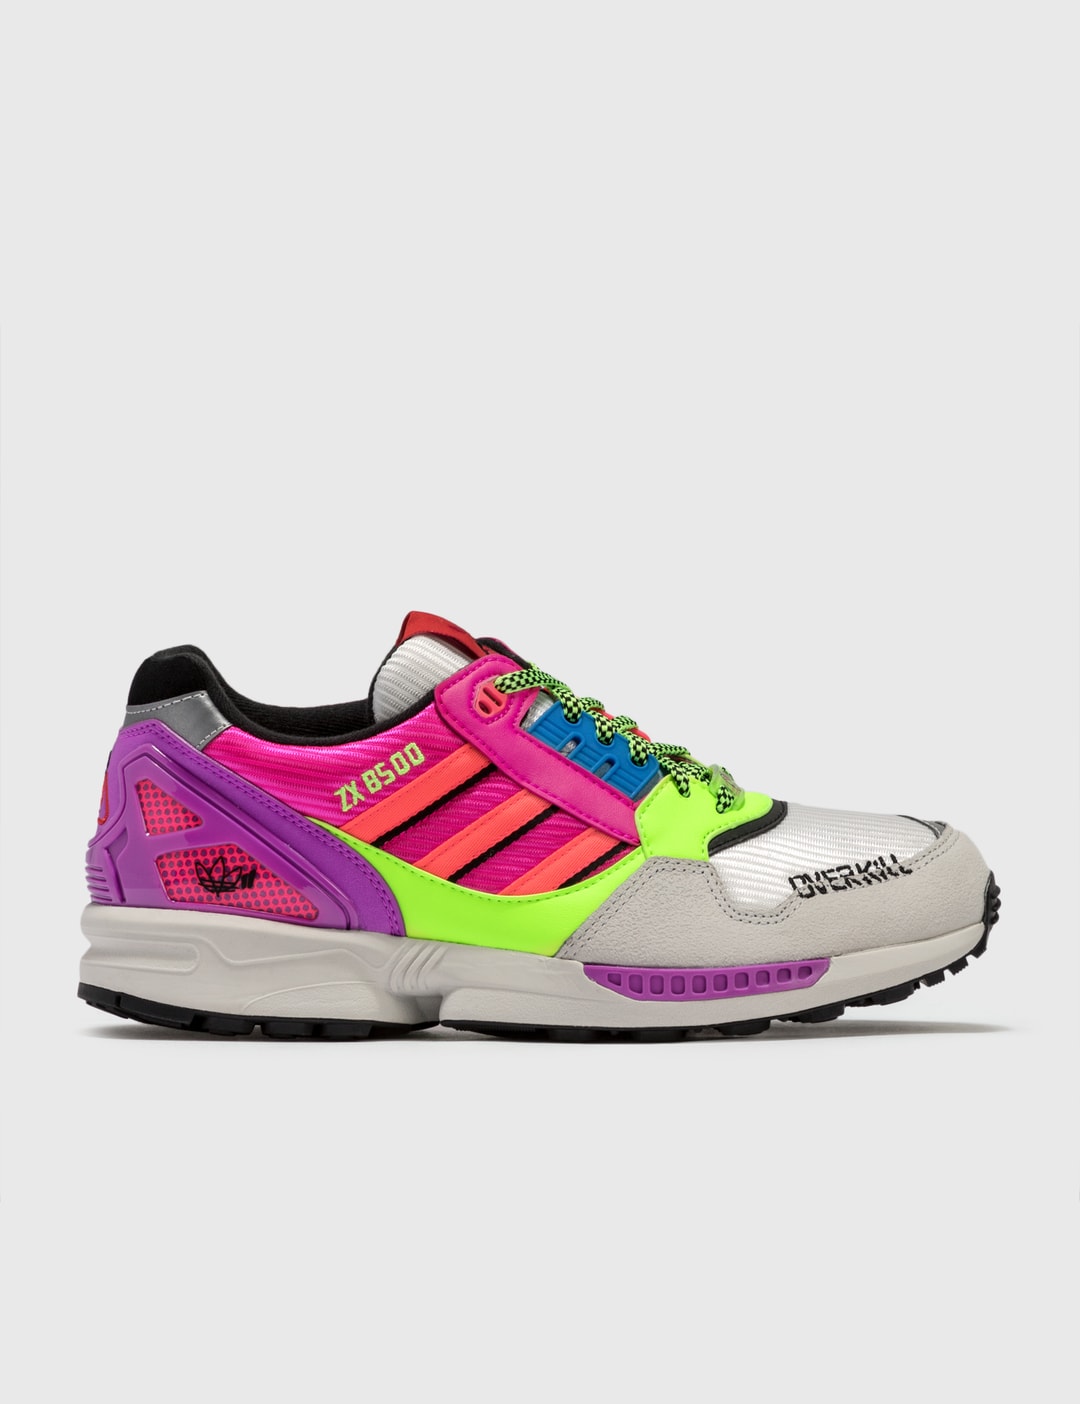 Mention Estimate Couple Adidas Originals - ZX 8500 Overkill (The O) | HBX - Globally Curated  Fashion and Lifestyle by Hypebeast